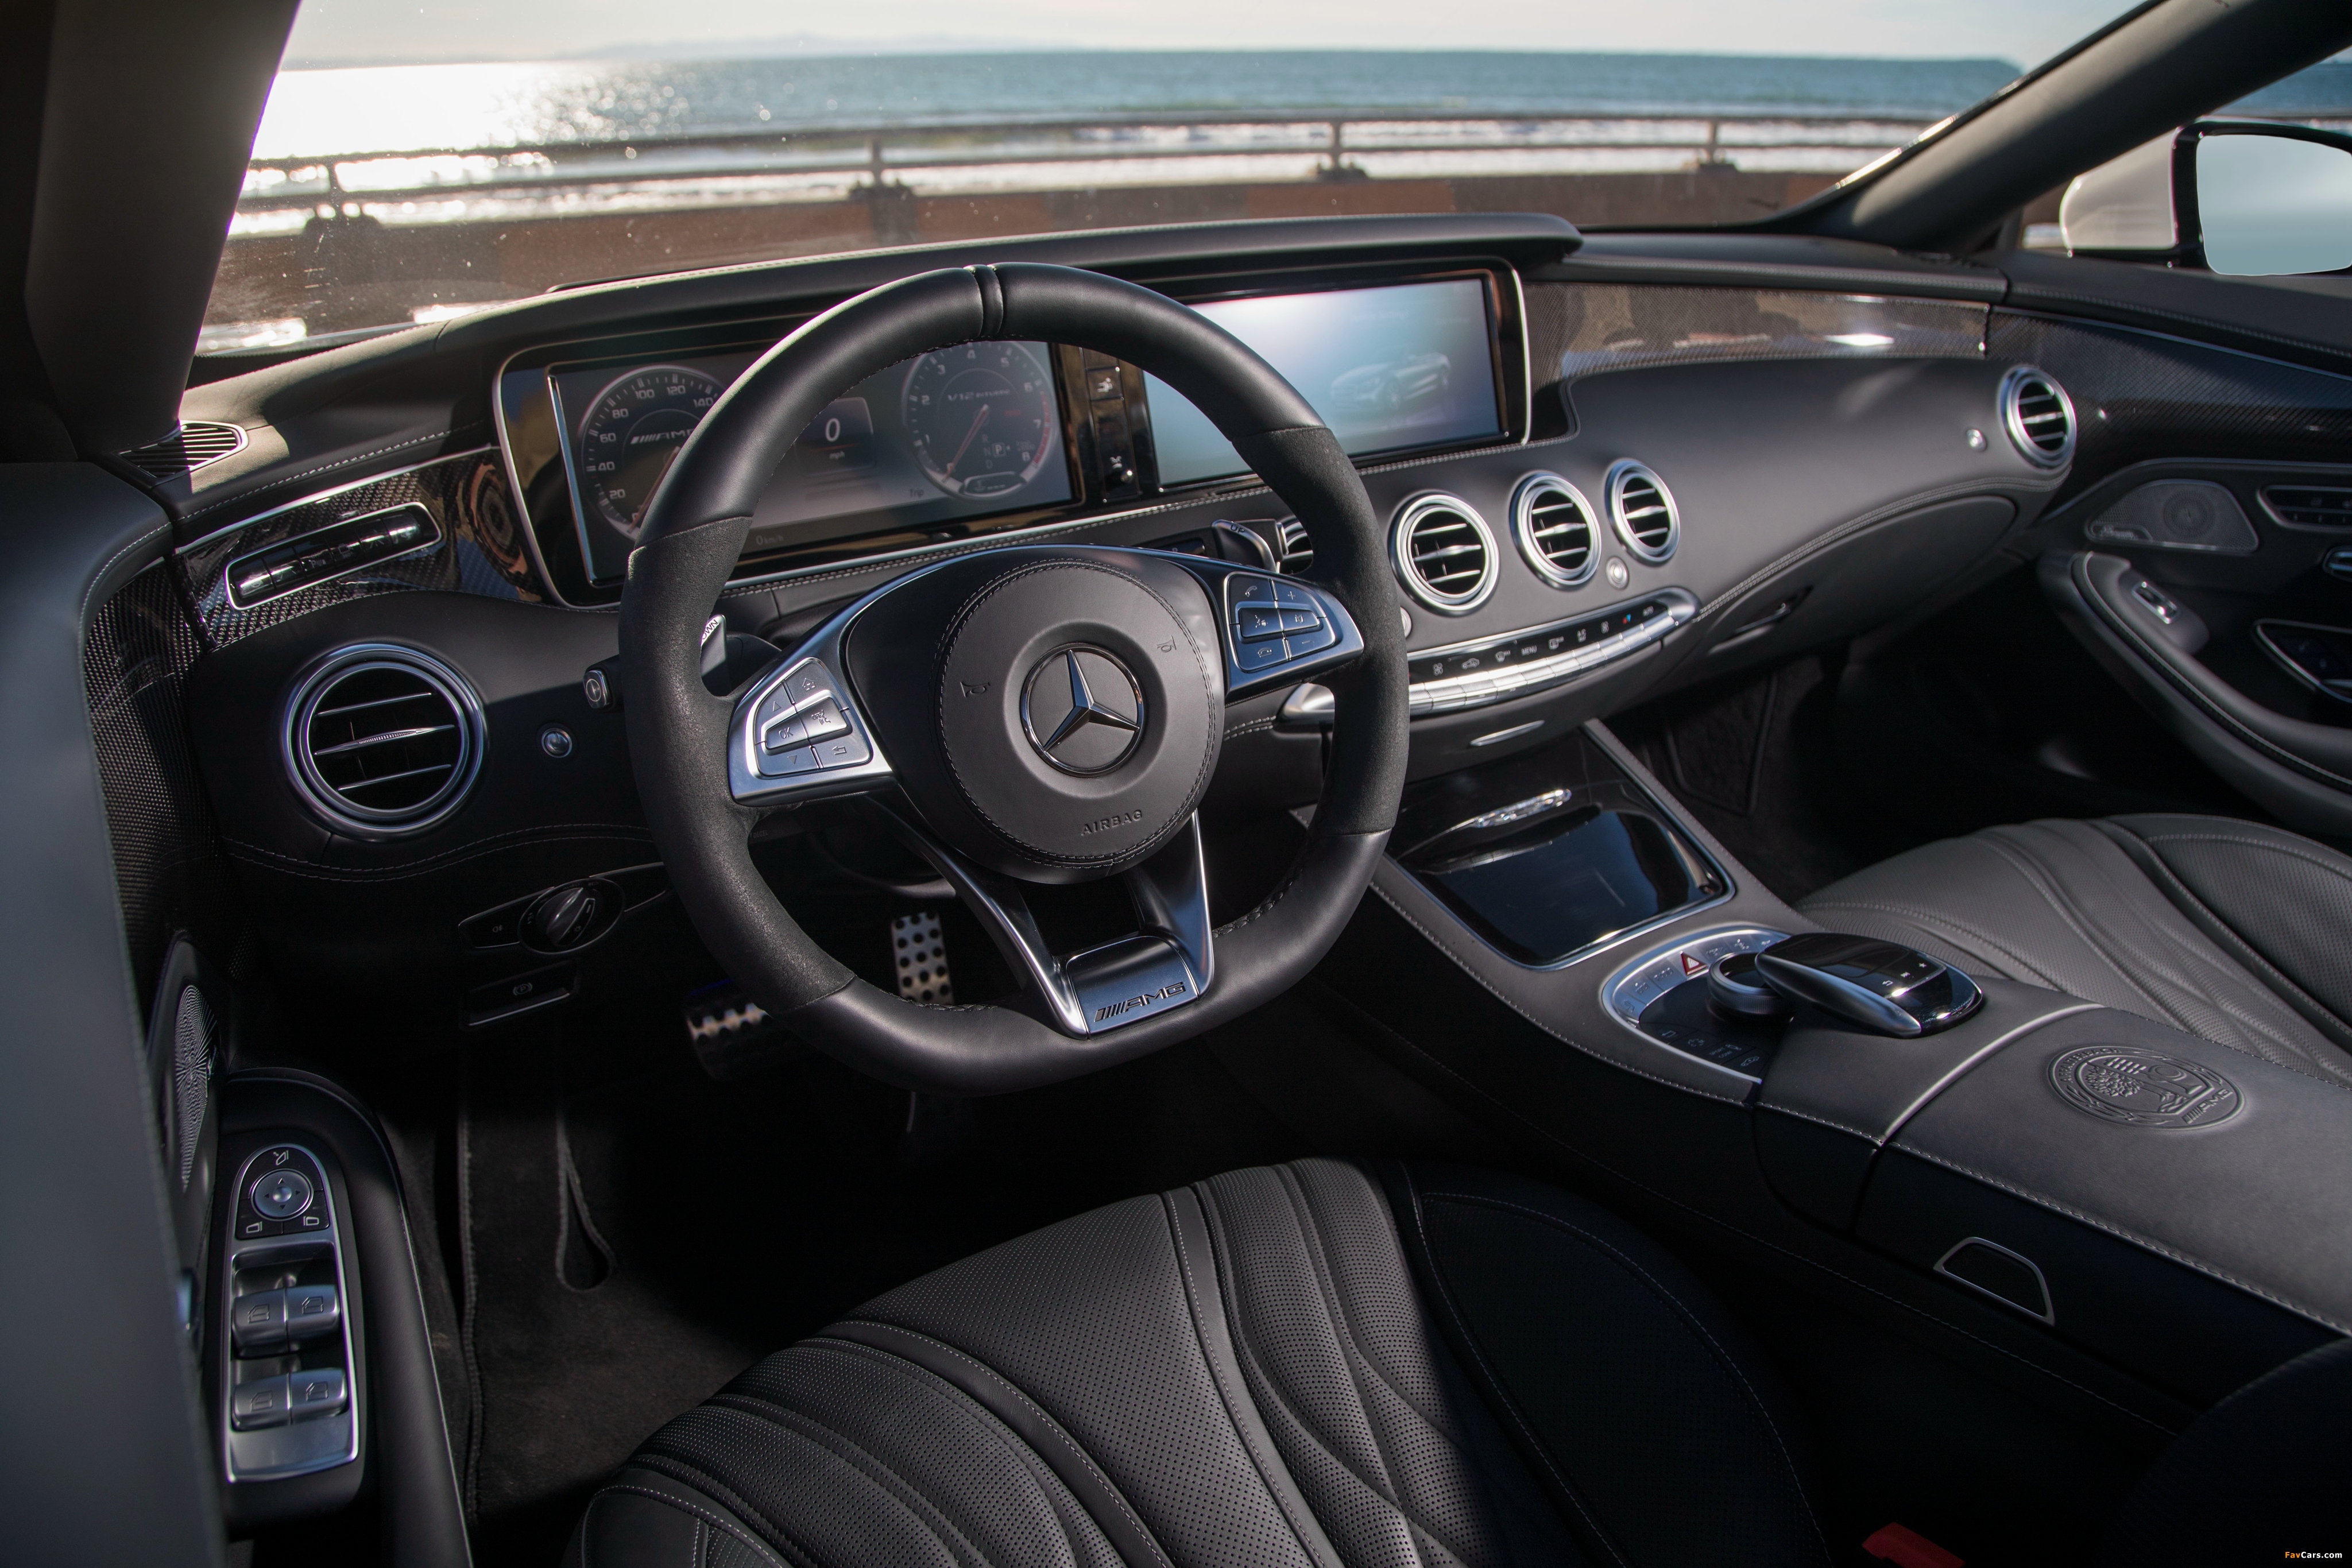 Mercedes-AMG S 65 Cabriolet North America (A217) 2016 images (4096 x 2731)